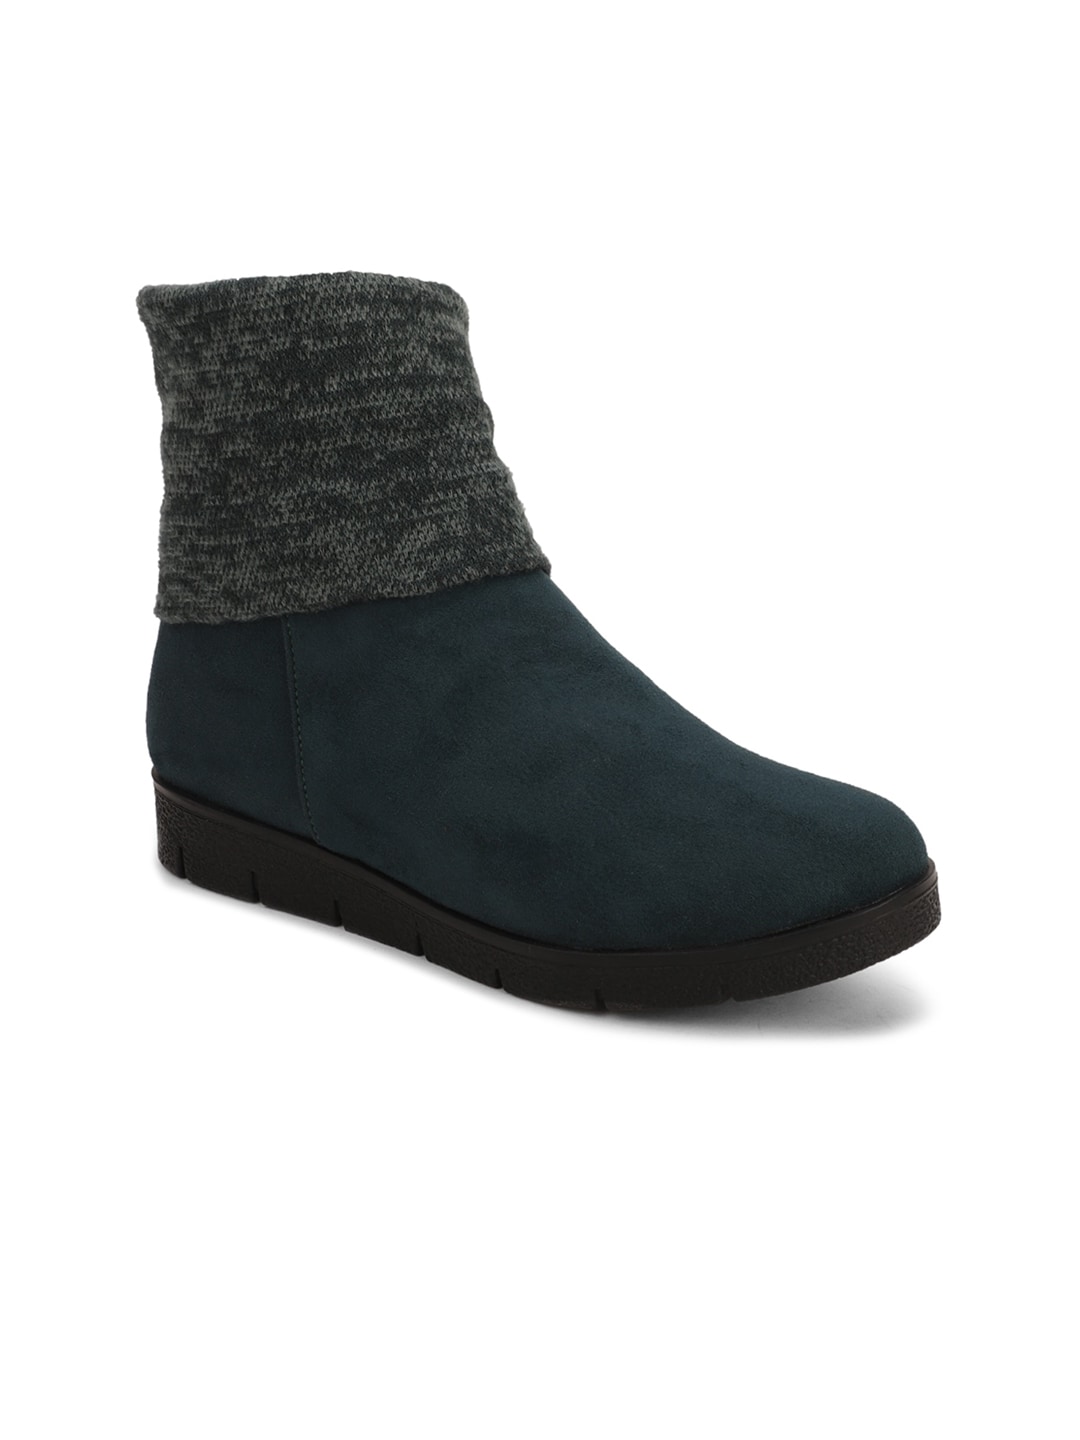 Bruno Manetti Green Suede Mid-Top Flatform Heeled Boots Price in India